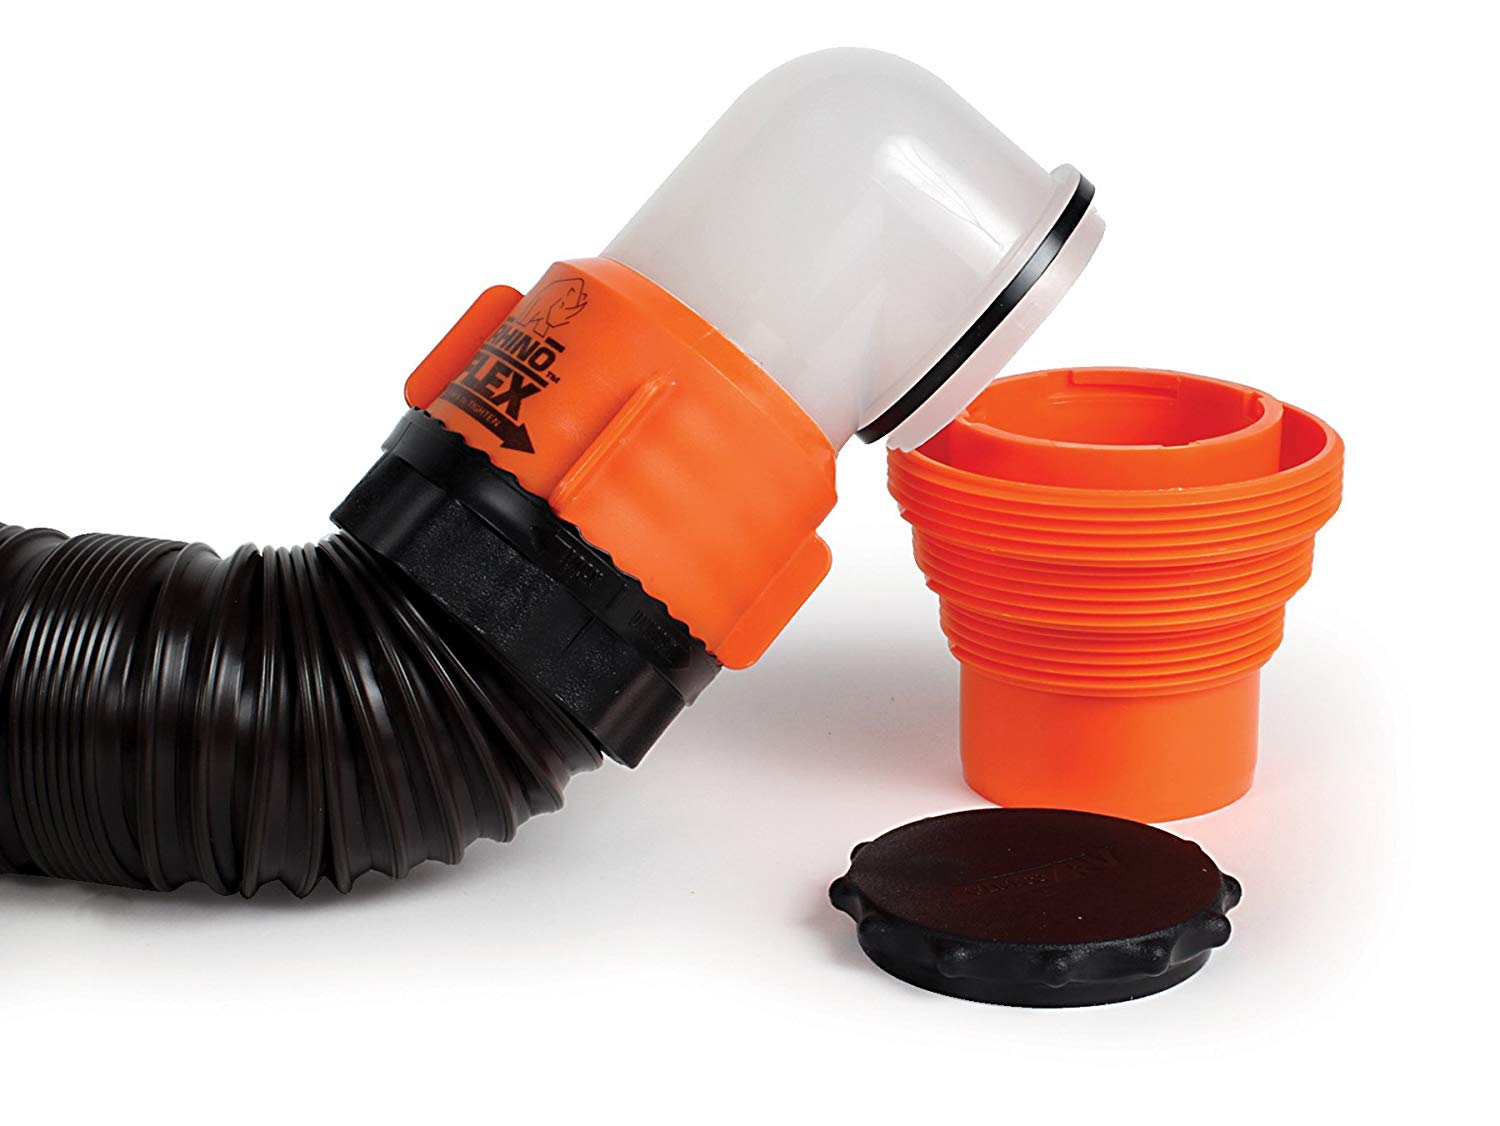 Camco 20' RhinoFLEX 20-Foot RV Sewer Hose Kit, Swivel Transparent Elbow with 4-in-1 Dump Station Fitting-Storage Caps Included 39741